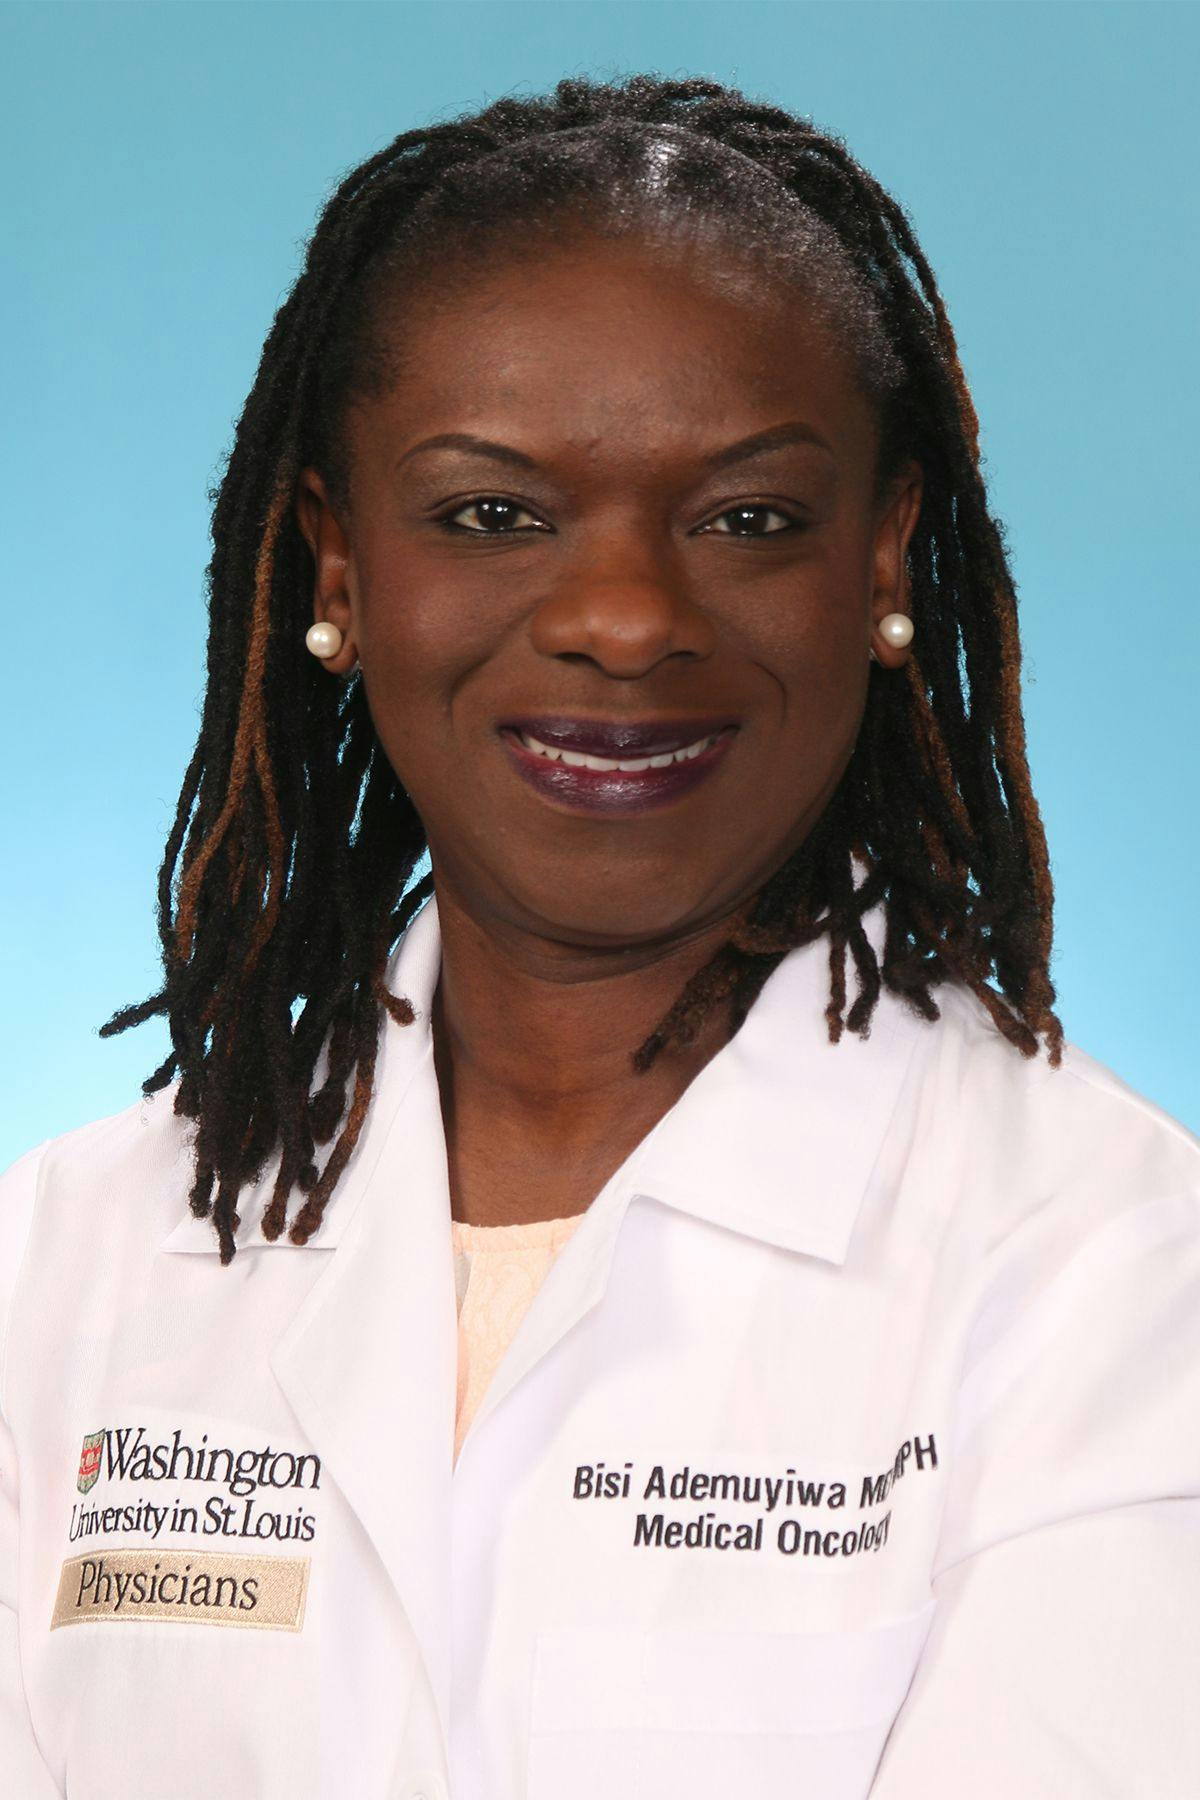 Foluso Olabisi Ademuyiwa, MD, MPH, MSCI

Associate Professor of Medicine, Division of Oncology, Section of Breast Oncology

Washington University School of Medicine

Siteman Cancer Center St Louis, MO